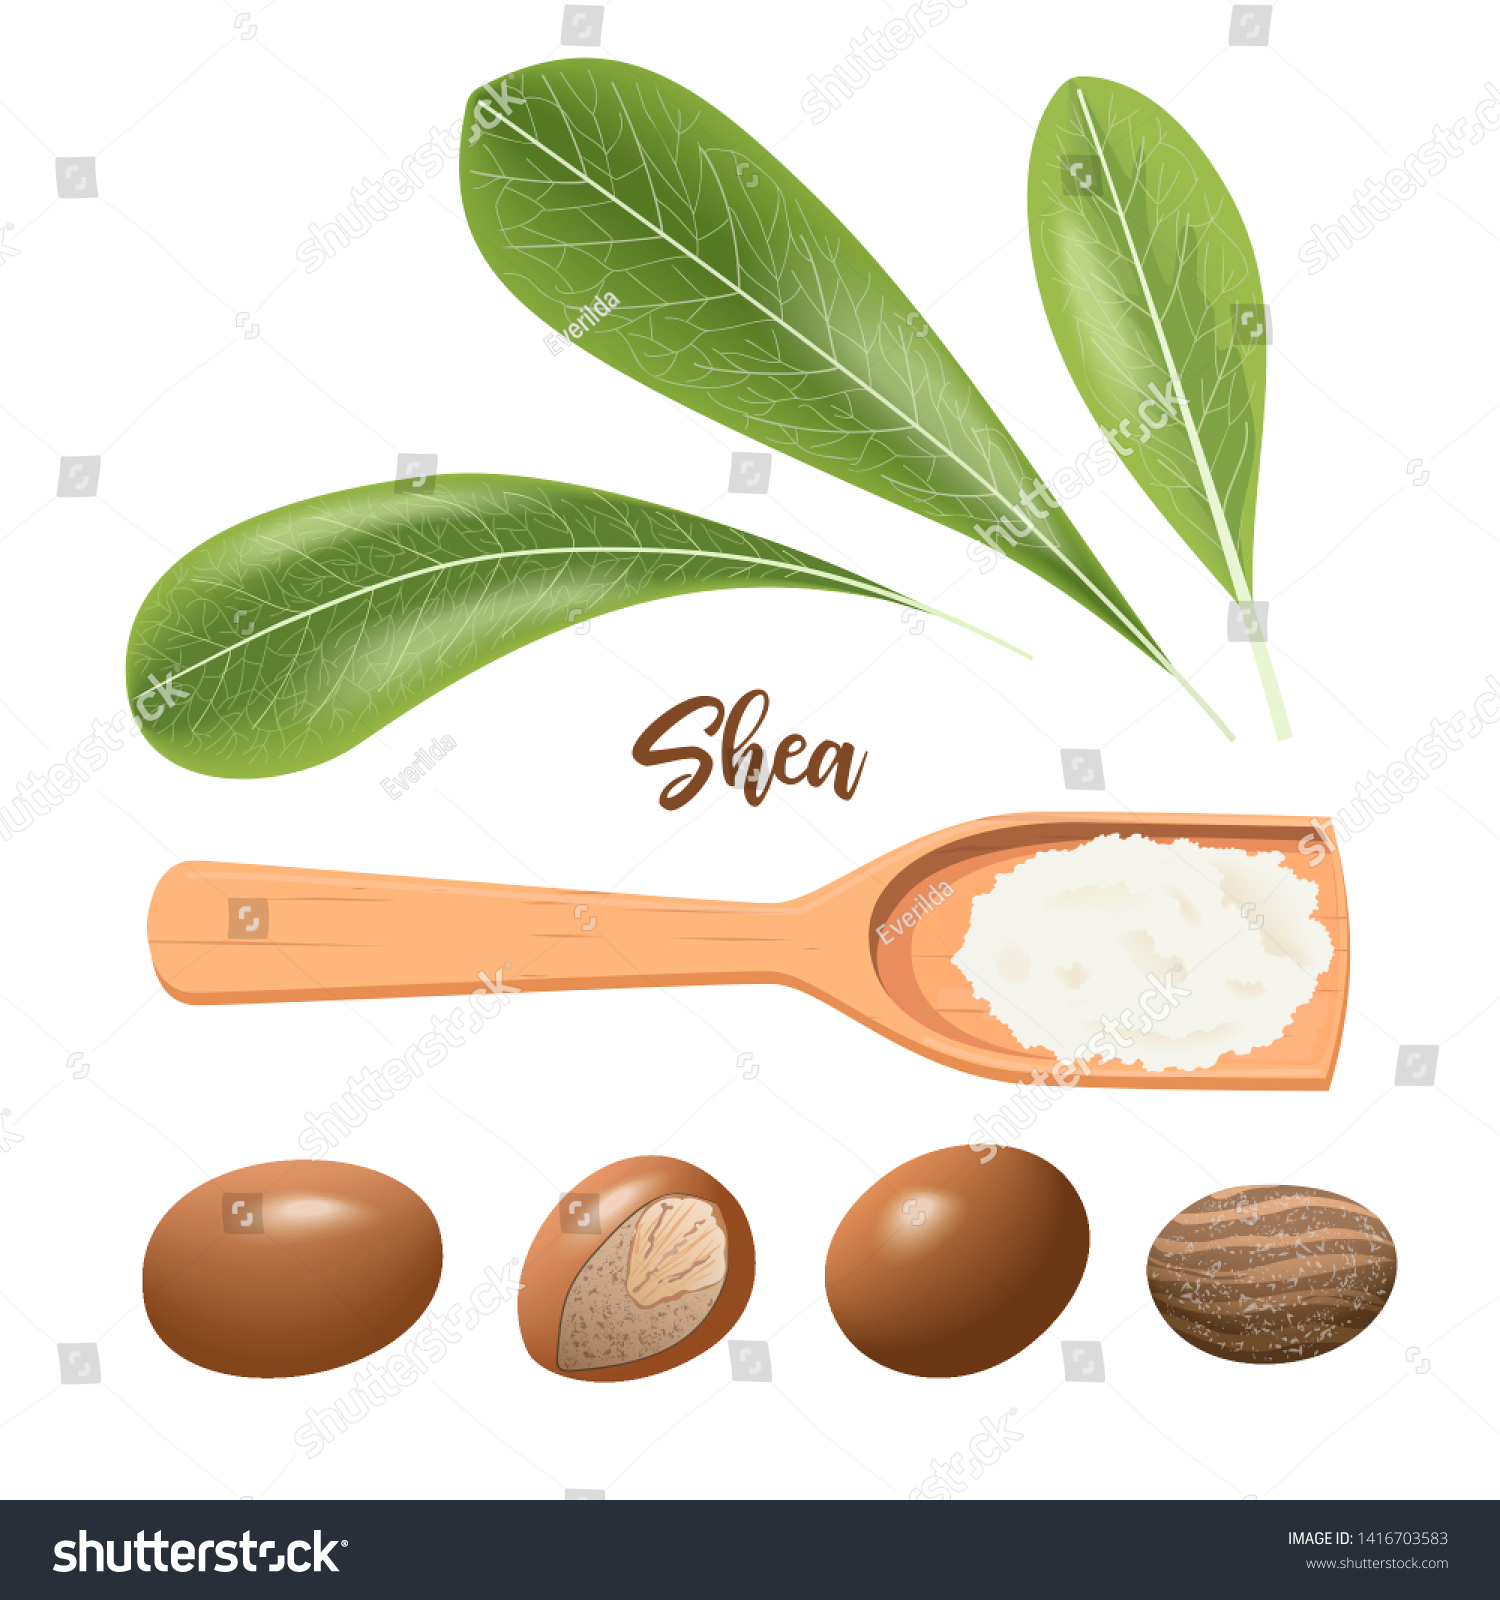 SVG of Shea nuts whole and cracked. Leaves and shea butter on wooden spoon. Shi tree pods, karite. Vitellaria paradoxa. Card template, copy space. for cosmetics, aromatherapy, perfume, healthcare, ointment svg